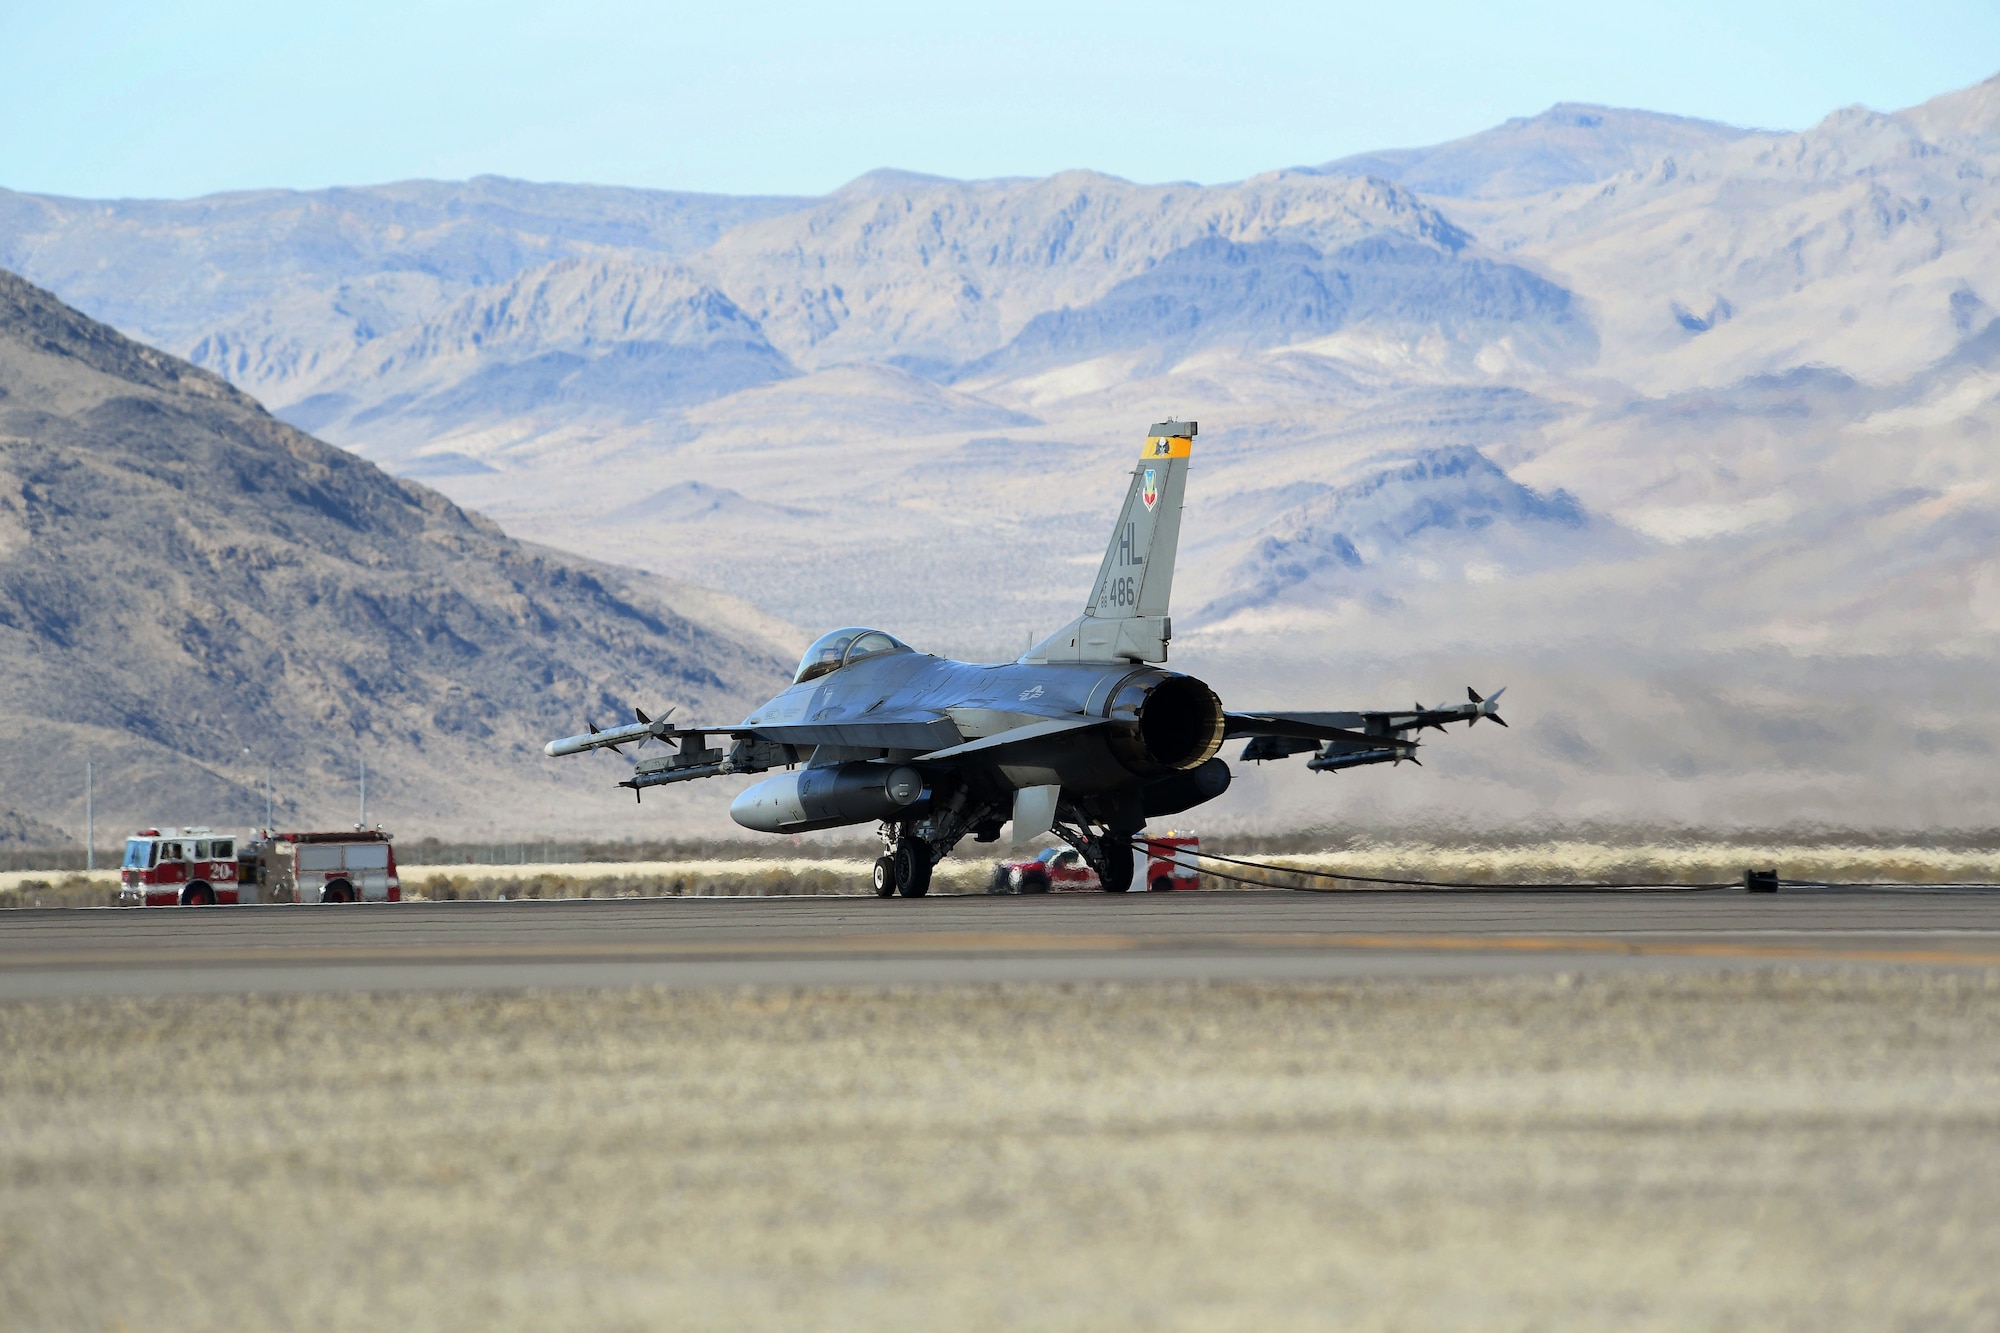 An F-16 Fighting Falcon sits on the flightline after engaging the aircraft arresting system for certification purposes Nov. 15, 2016, at Creech Air Force Base, Nev. The purpose of an active aircraft arresting system is to assist in decelerating aircraft during emergency situations. (U.S. Air Force photo by Airman 1st Class James Thompson) 